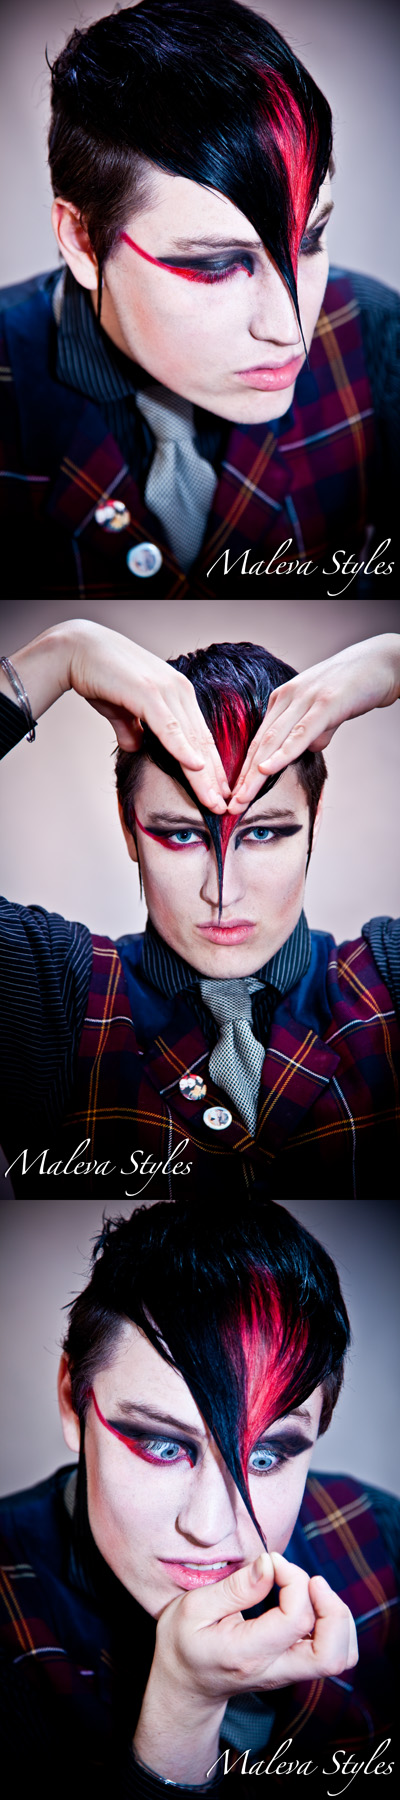 Male model photo shoot of Zev Ubu Curtis Hoffman by Todd c Hartman, hair styled by Maleva Styles, makeup by Camille Ivy